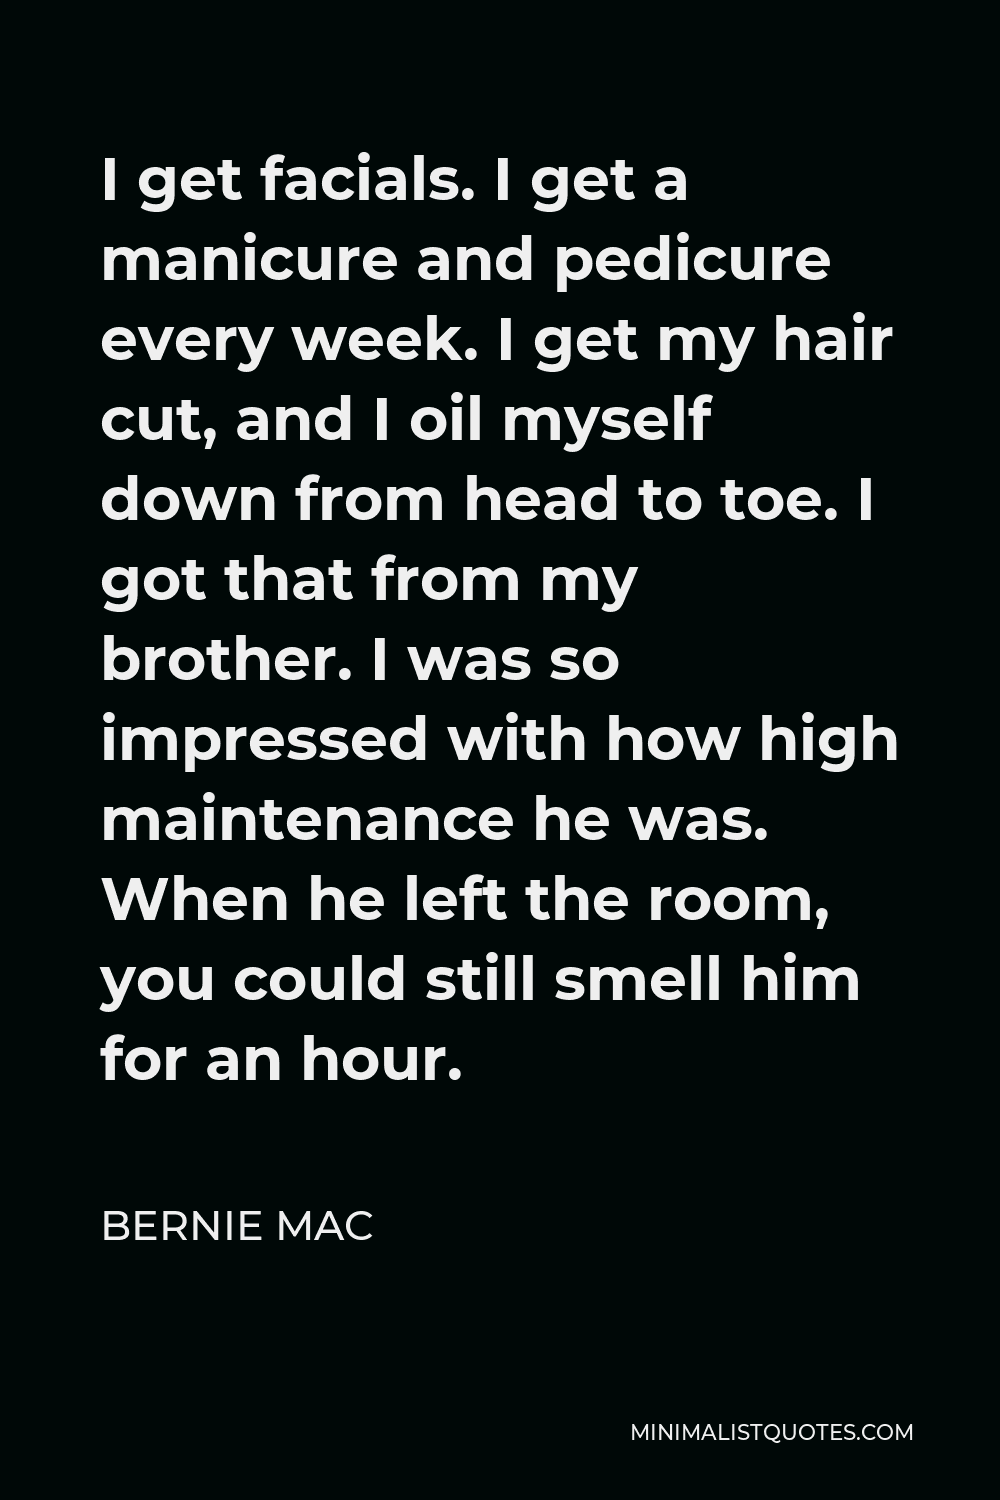 Bernie Mac Quote - I get facials. I get a manicure and pedicure every week. I get my hair cut, and I oil myself down from head to toe. I got that from my brother. I was so impressed with how high maintenance he was. When he left the room, you could still smell him for an hour.